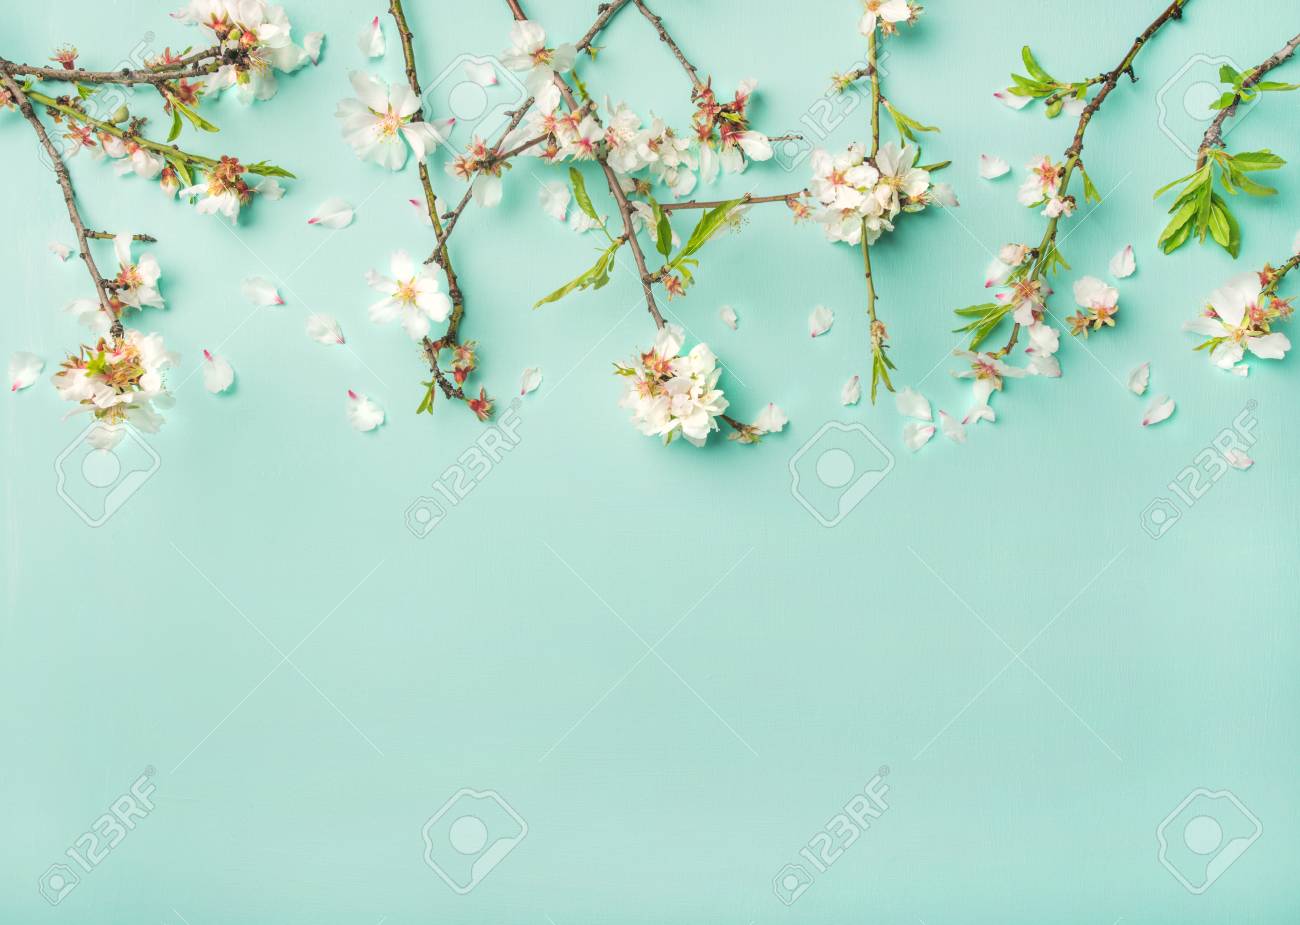 Spring Floral Background Texture And Wallpaper Flat Lay Of